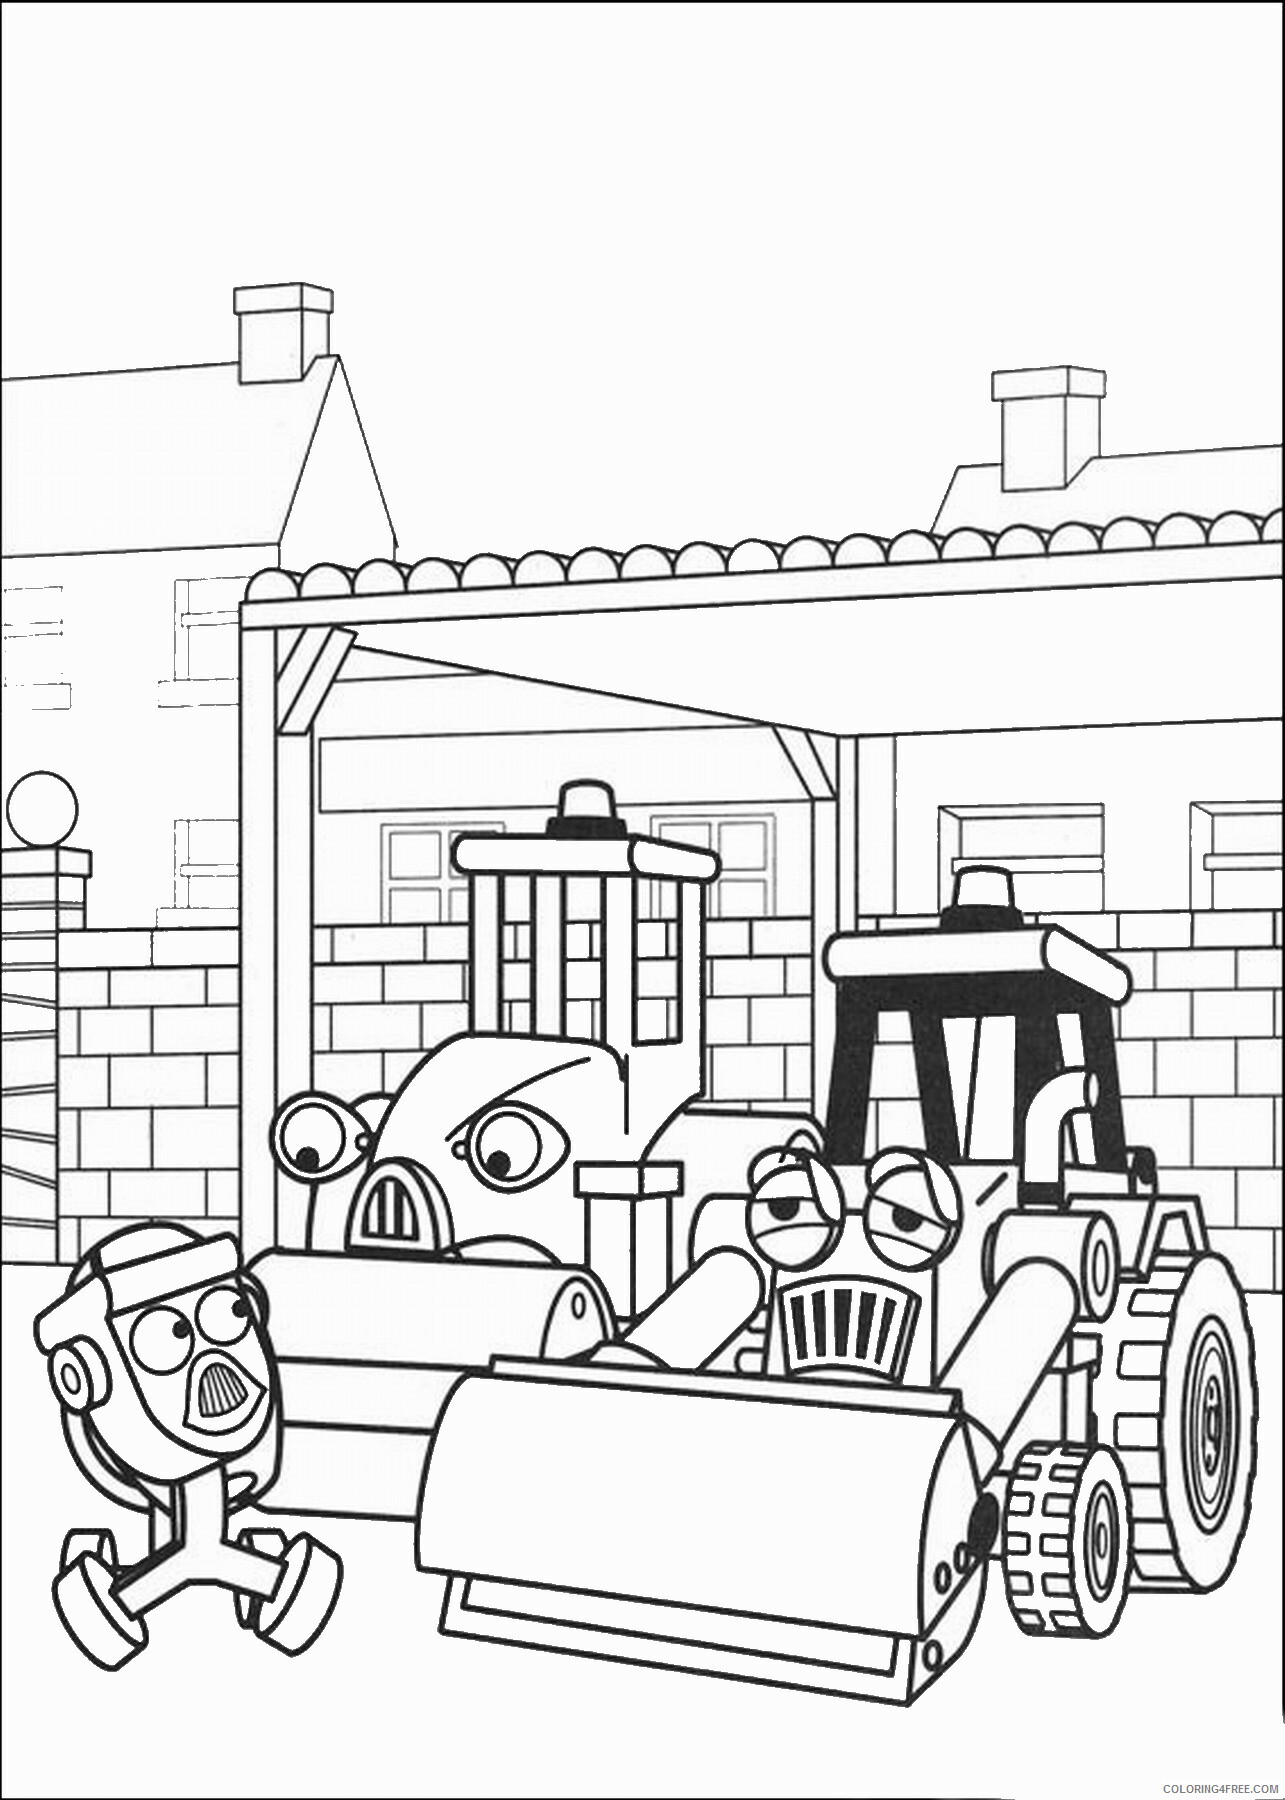 Bob the Builder Coloring Pages TV Film bob the builder_10 Printable 2020 00960 Coloring4free